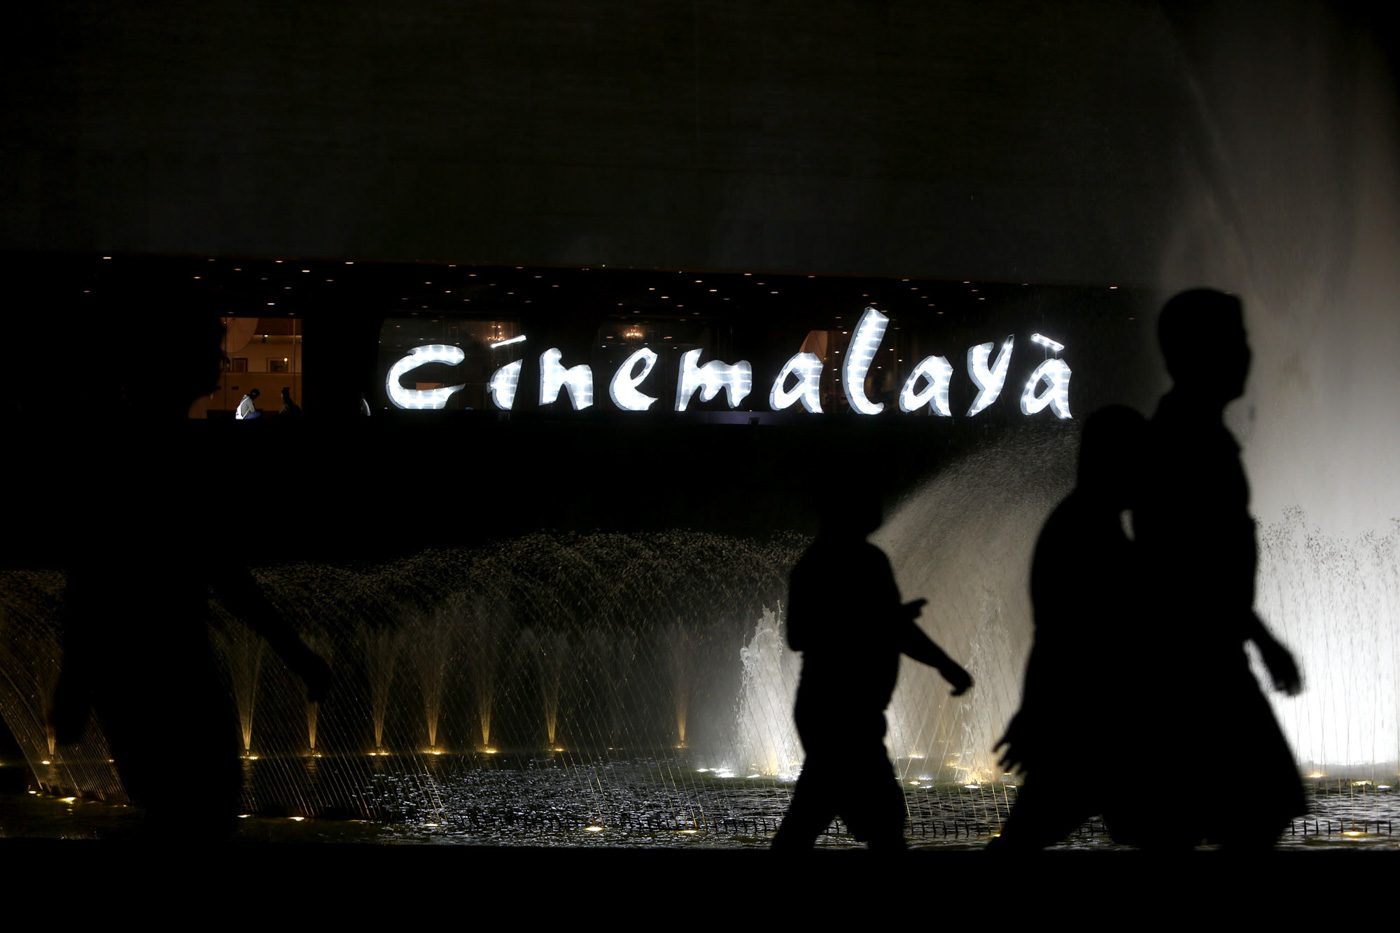 The cinemalaya logo illuminates during the opening of the independent film festival at the Cultural Center of the Philippines in Pasay City.
Photo by Inoue Jaene/Rappler 